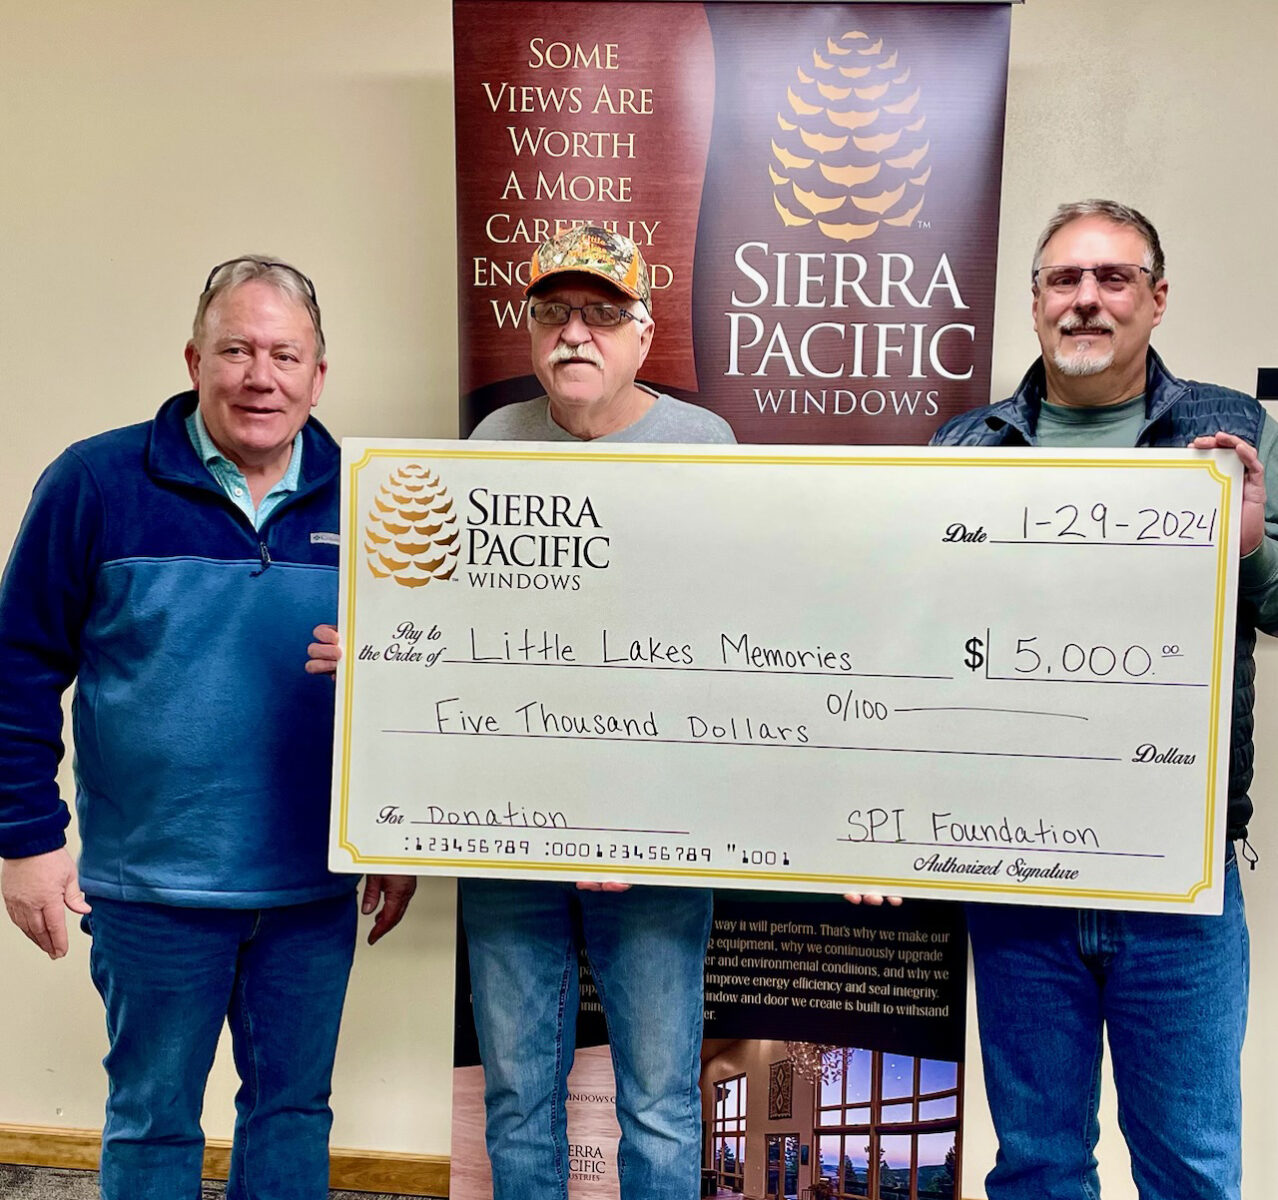 Sierra Pacific donates to Little Lakes Memories for hunts